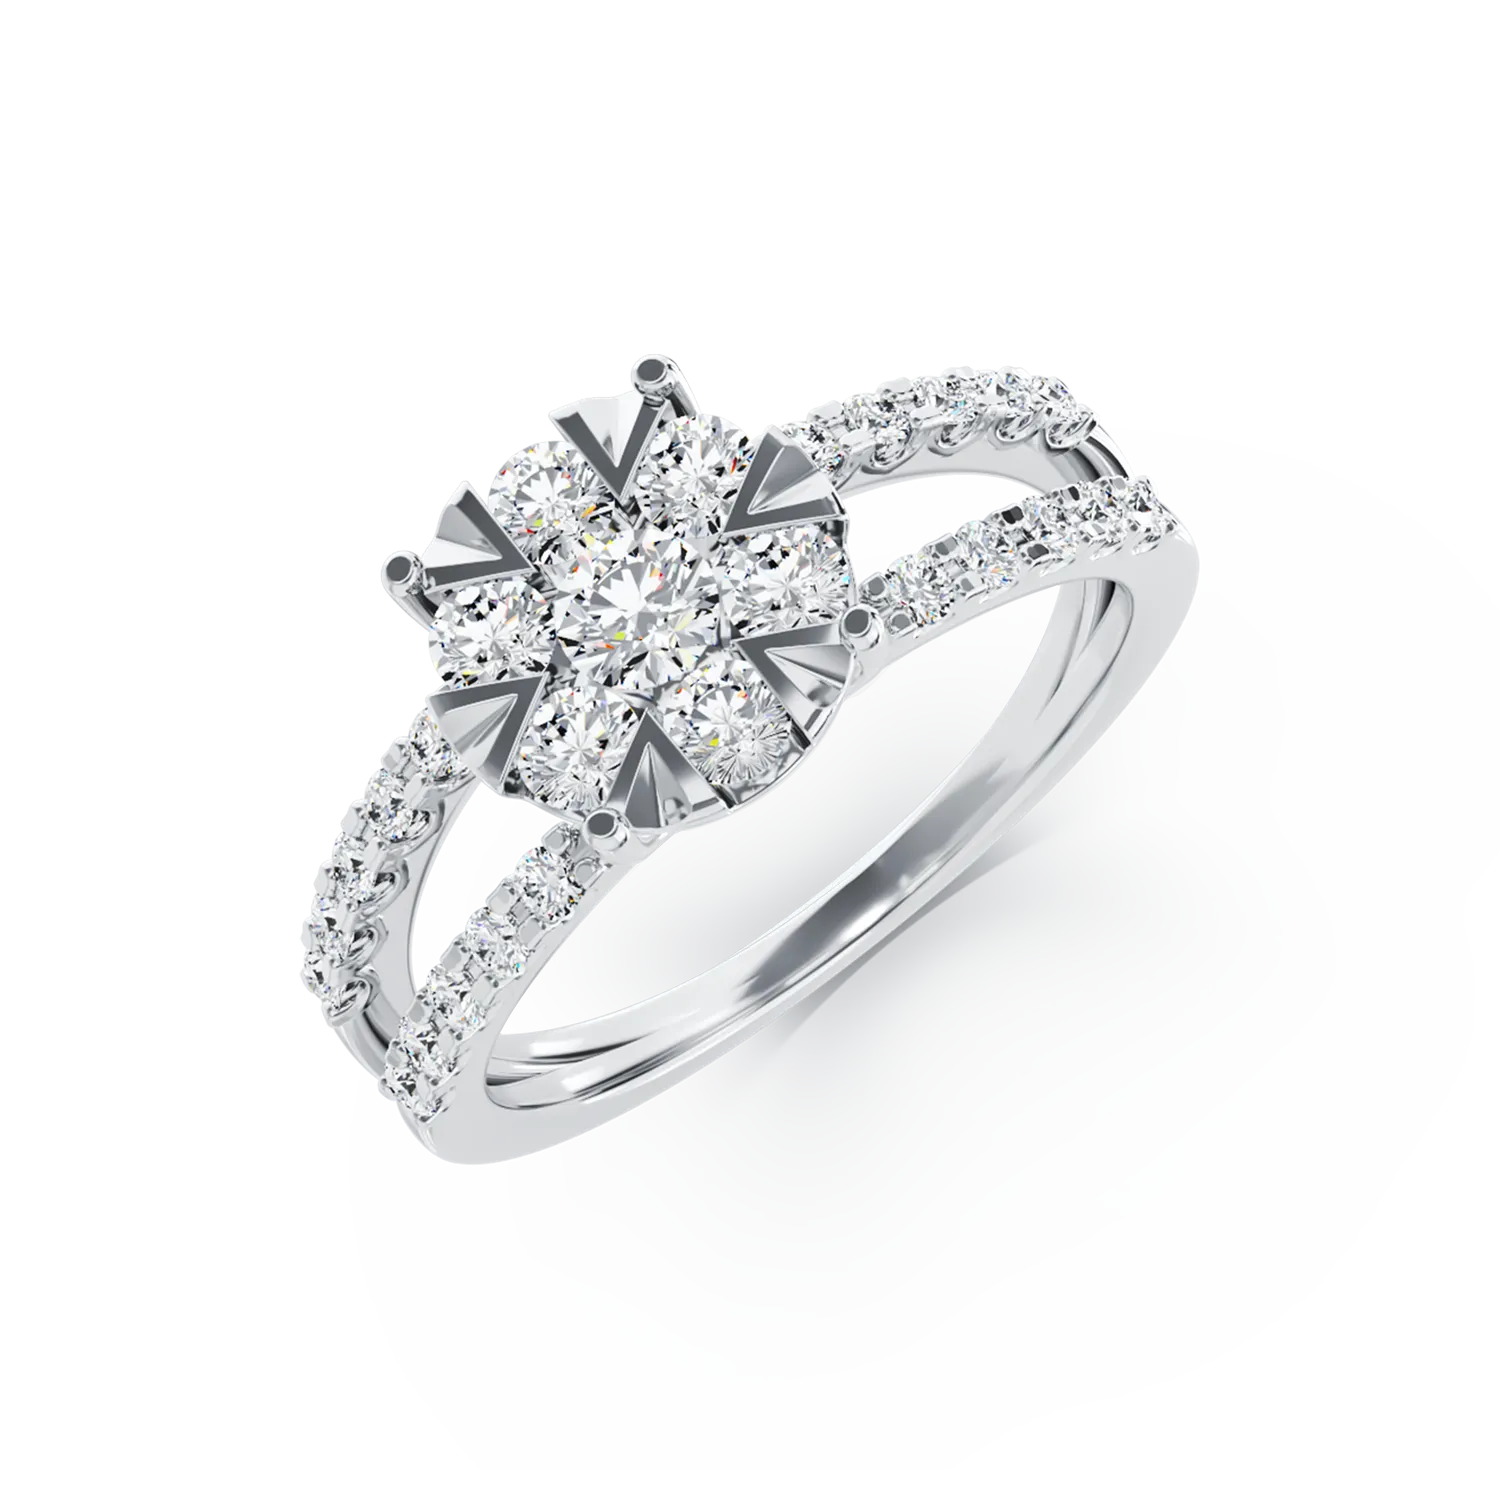 White gold engagement ring with 1ct diamonds